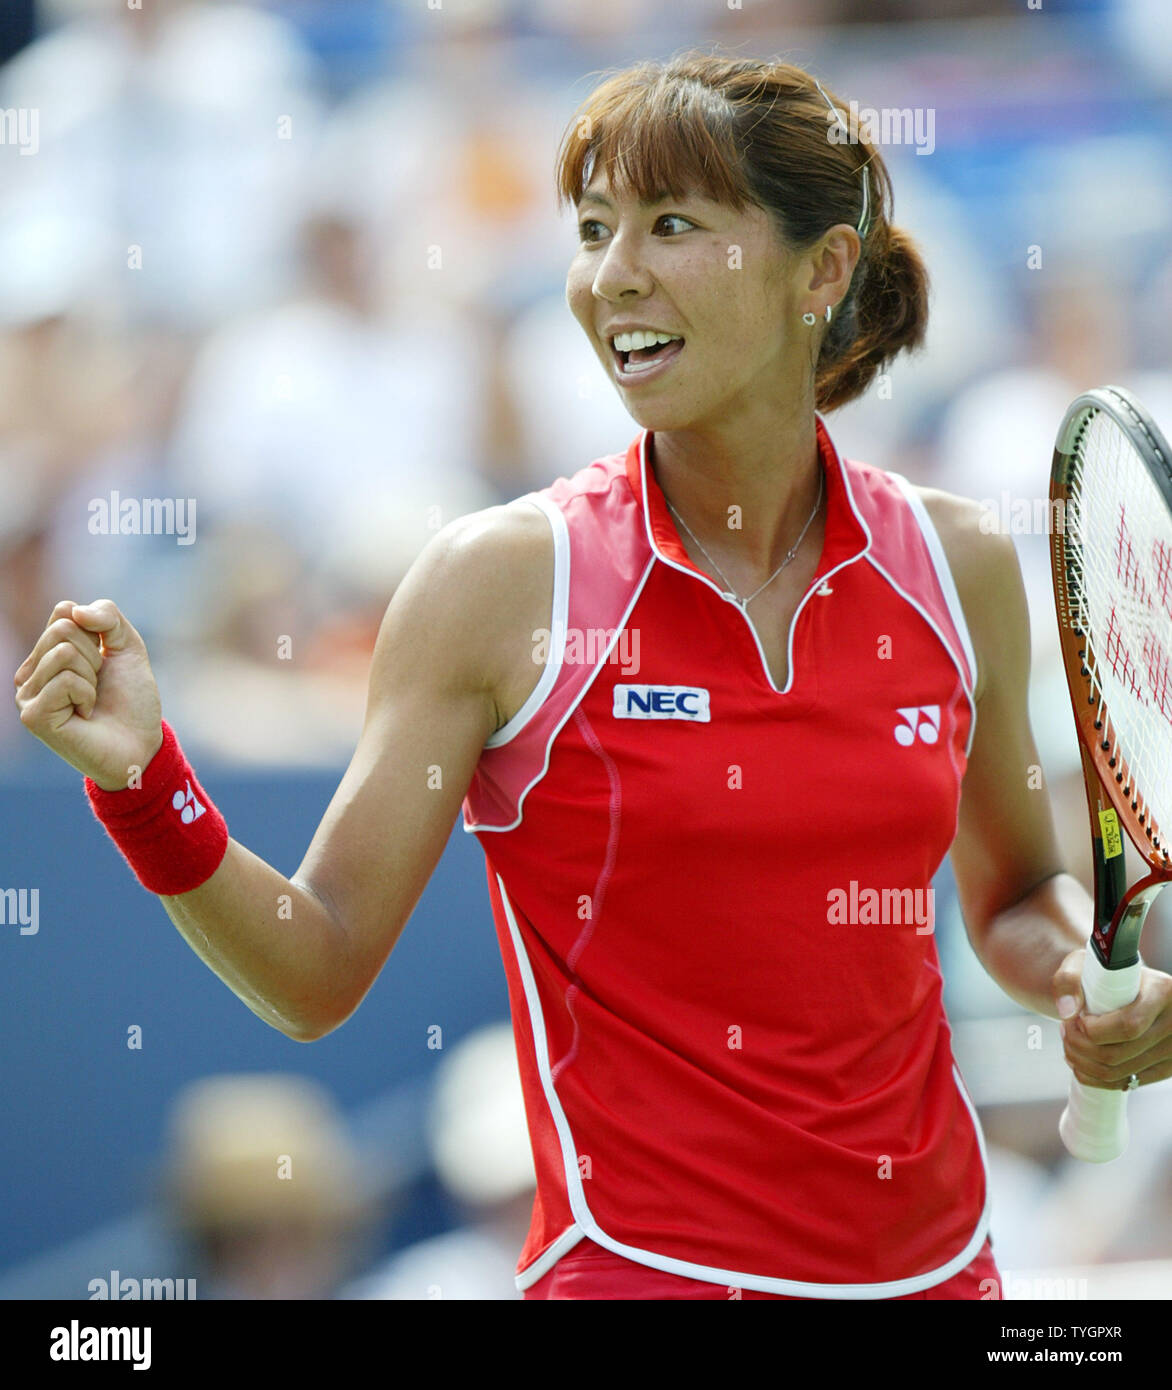 Shinobu Asagoe (JPN) pumps her fist while on route to defeating Eleni Daniilidou (GRE) in 3 sets during day 8 action at the US Open in Flushing, New York on September 6, 2004.    (UPI Photo/John Angelillo) Stock Photo